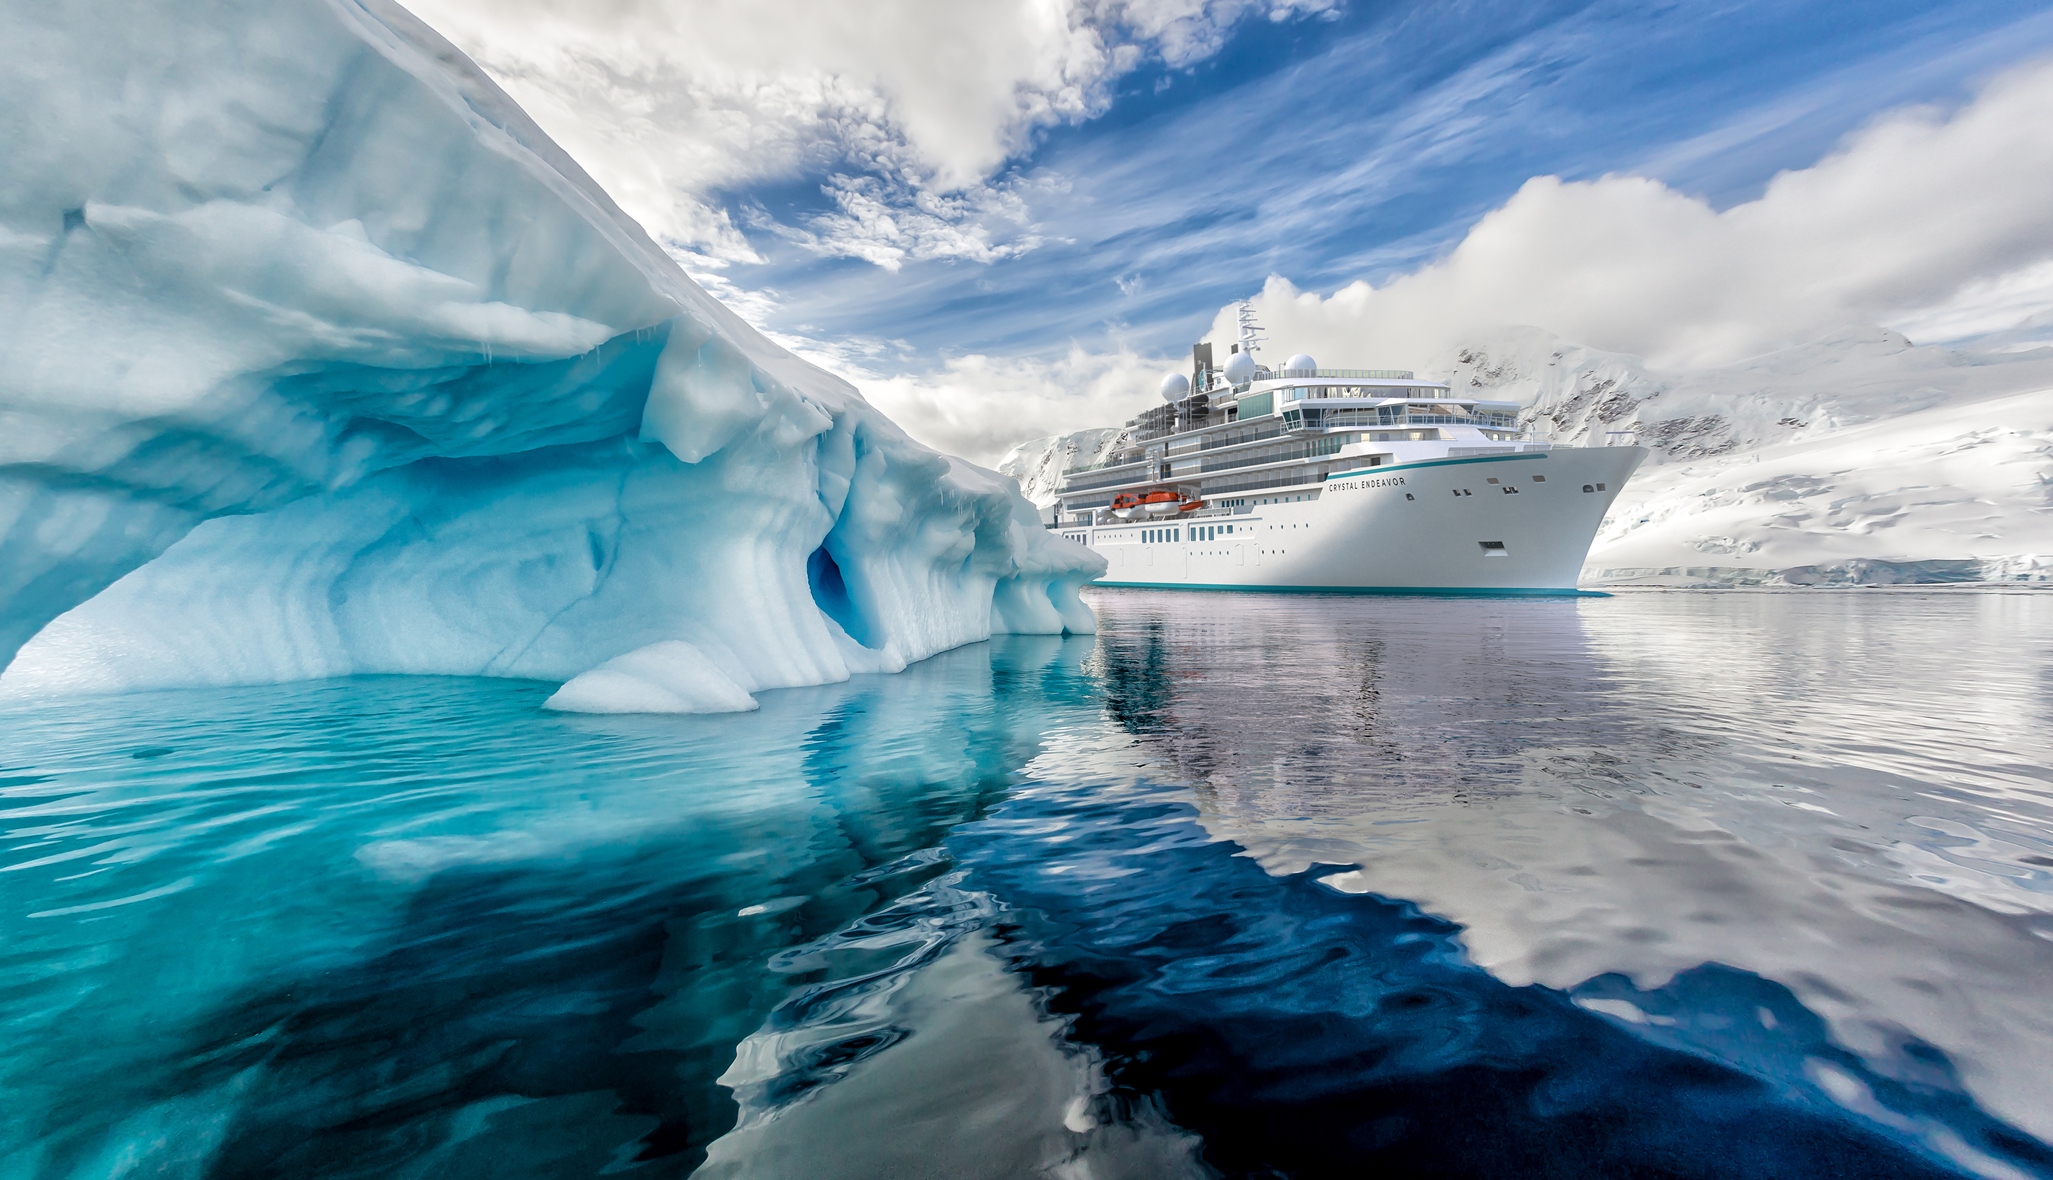 Development of the highly anticipated luxury expedition ship Crystal Endeavor has resumed as the cruise line looks ahead to new destinations and experiences for travelers.